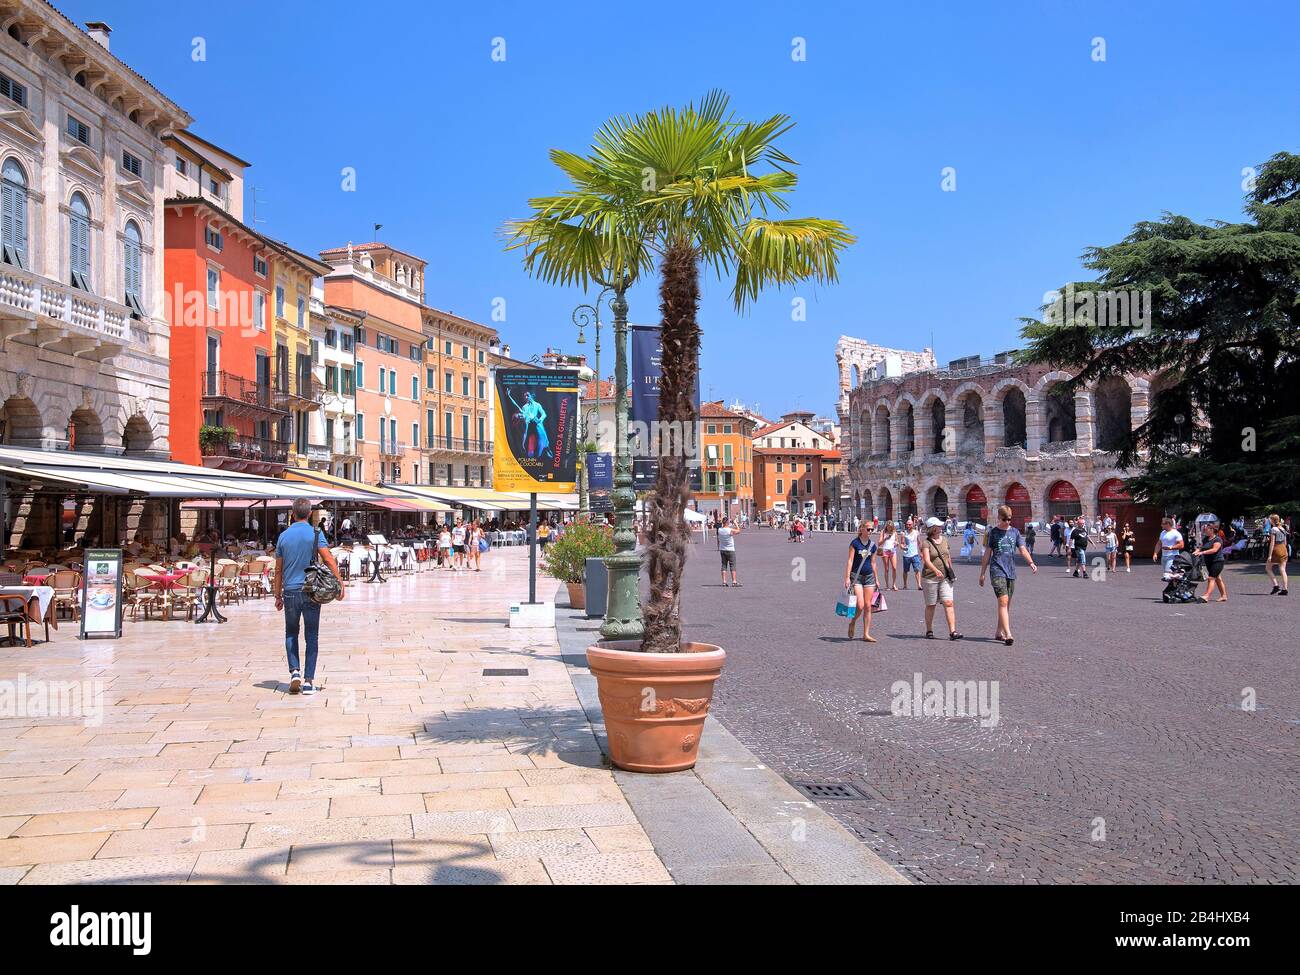 Piazza Bra In Verona Viewed From Ancient Roman Amphitheater, Veneto, Italy  Stock Photo, Picture and Royalty Free Image. Image 16019767.